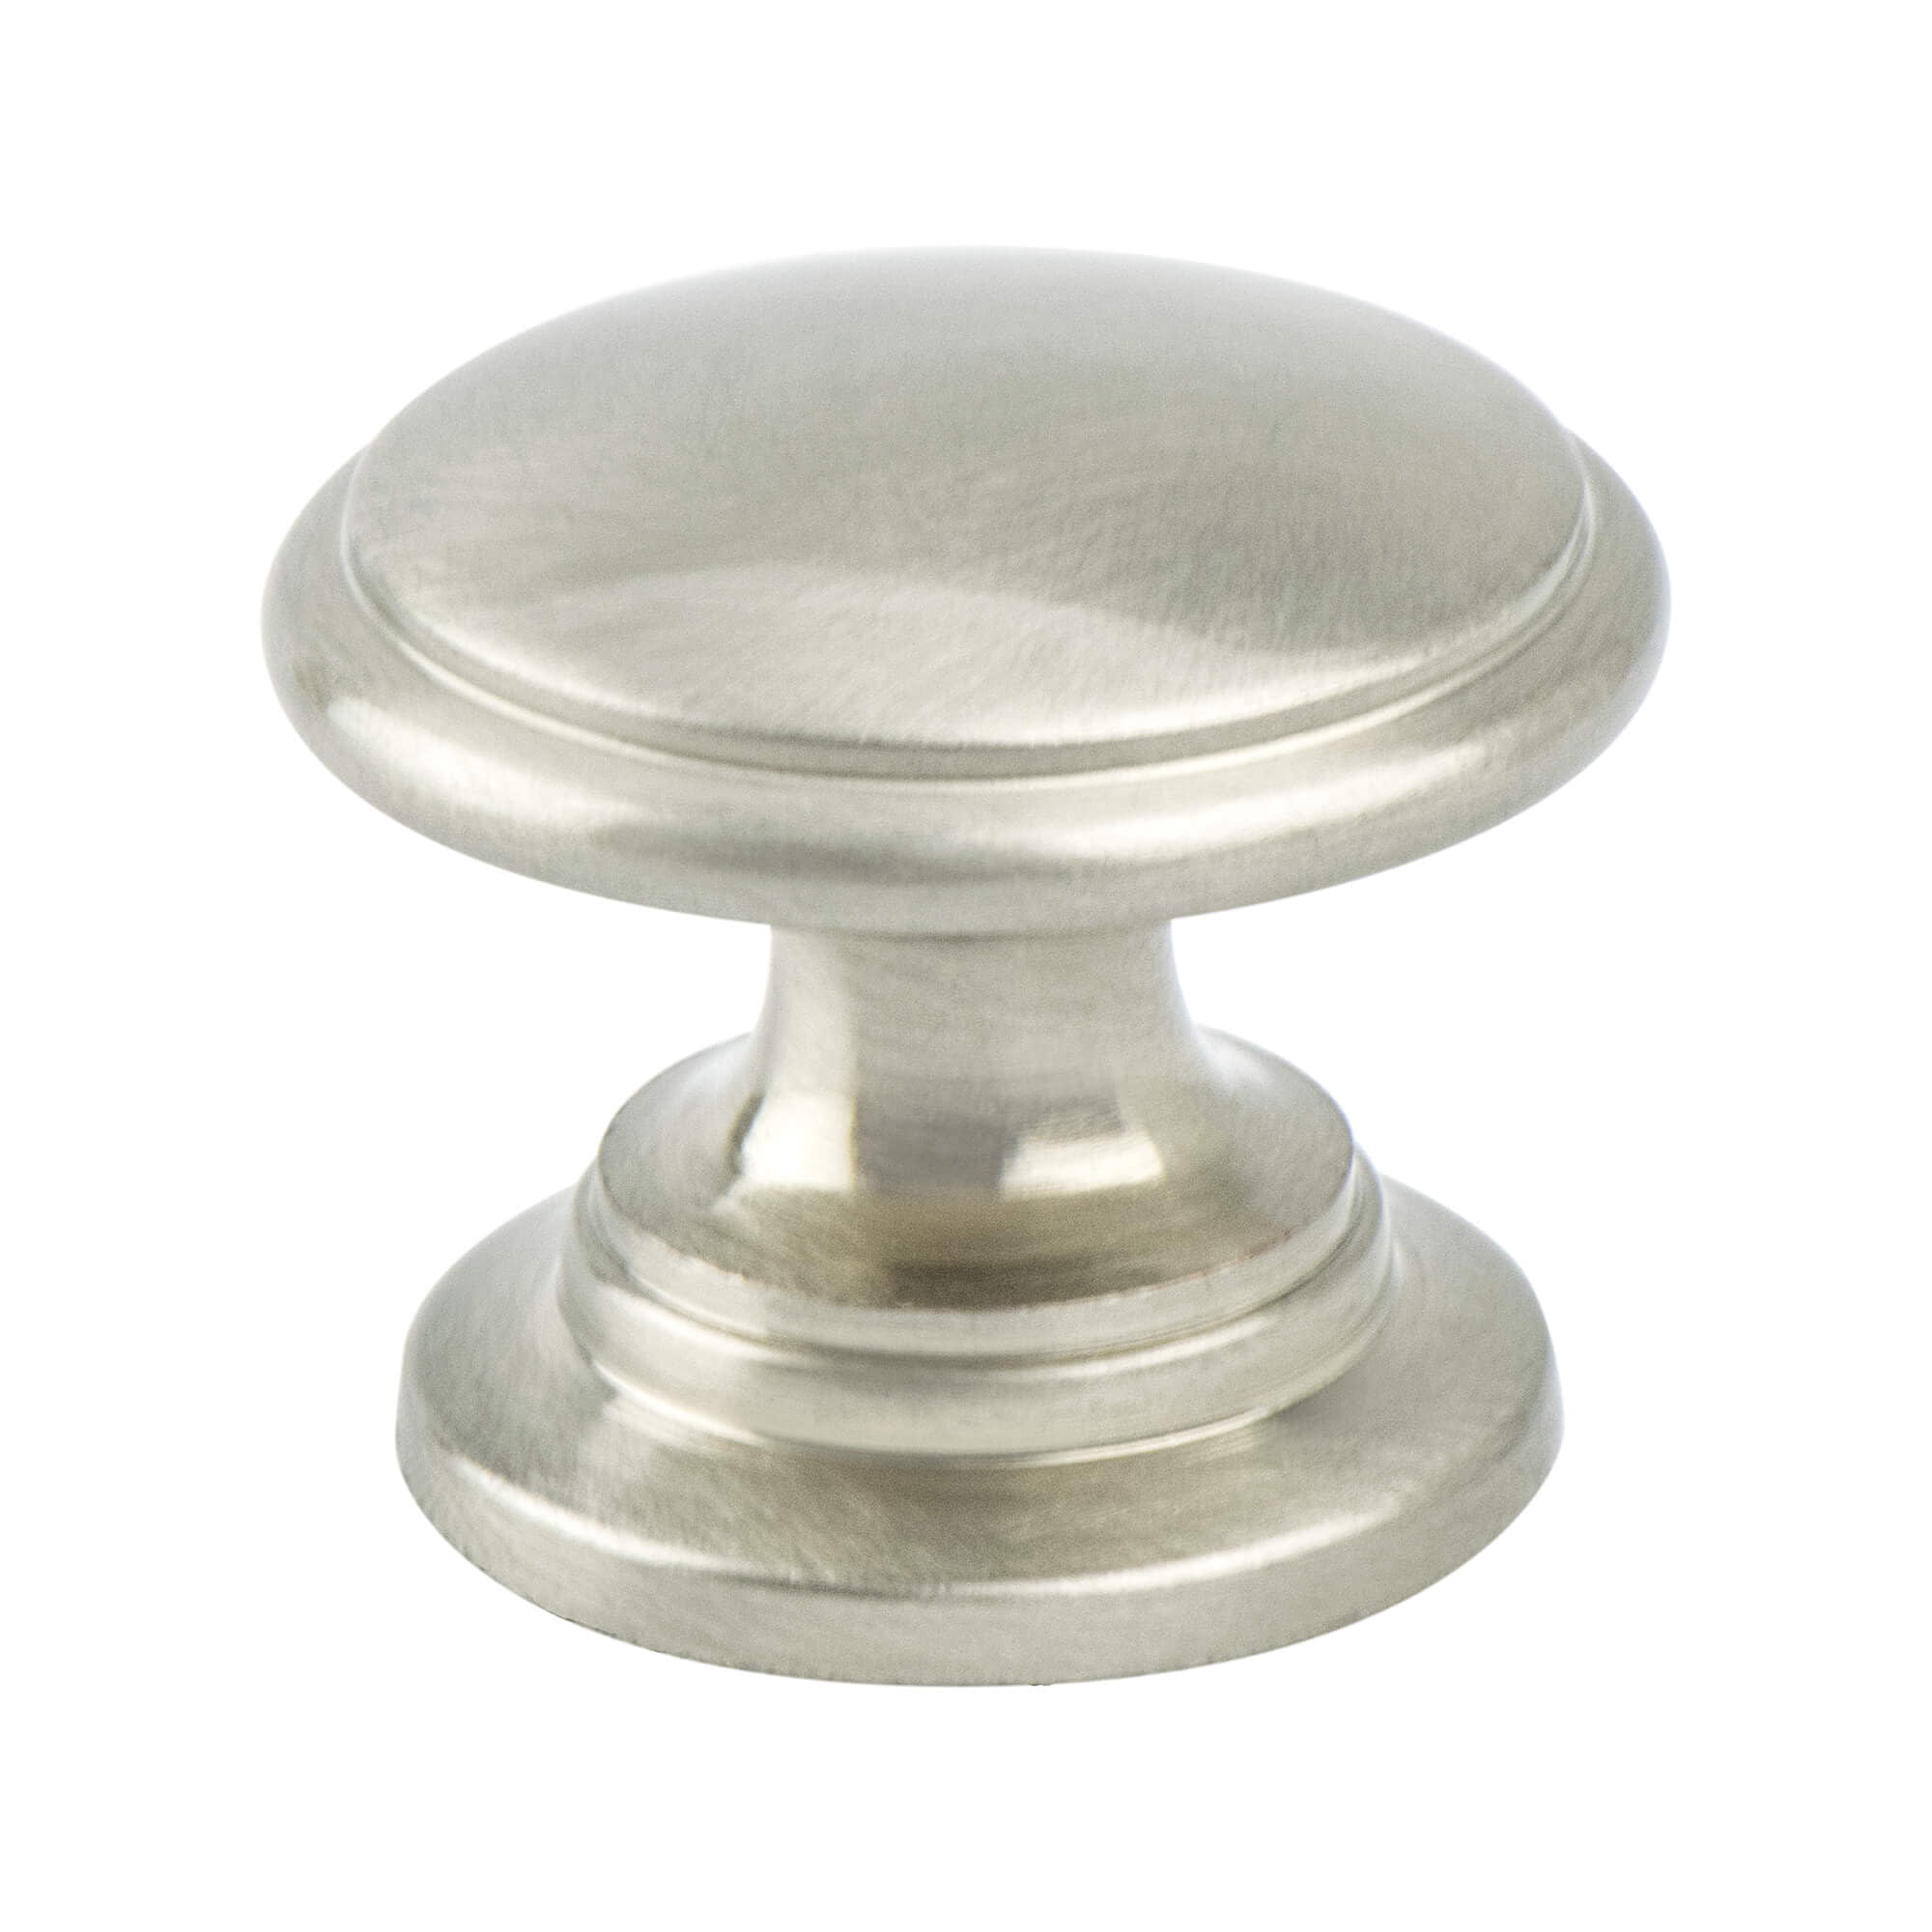 7891-1bpn-p 1.187 In. Dia. Andante Knob With Brushed Nickel